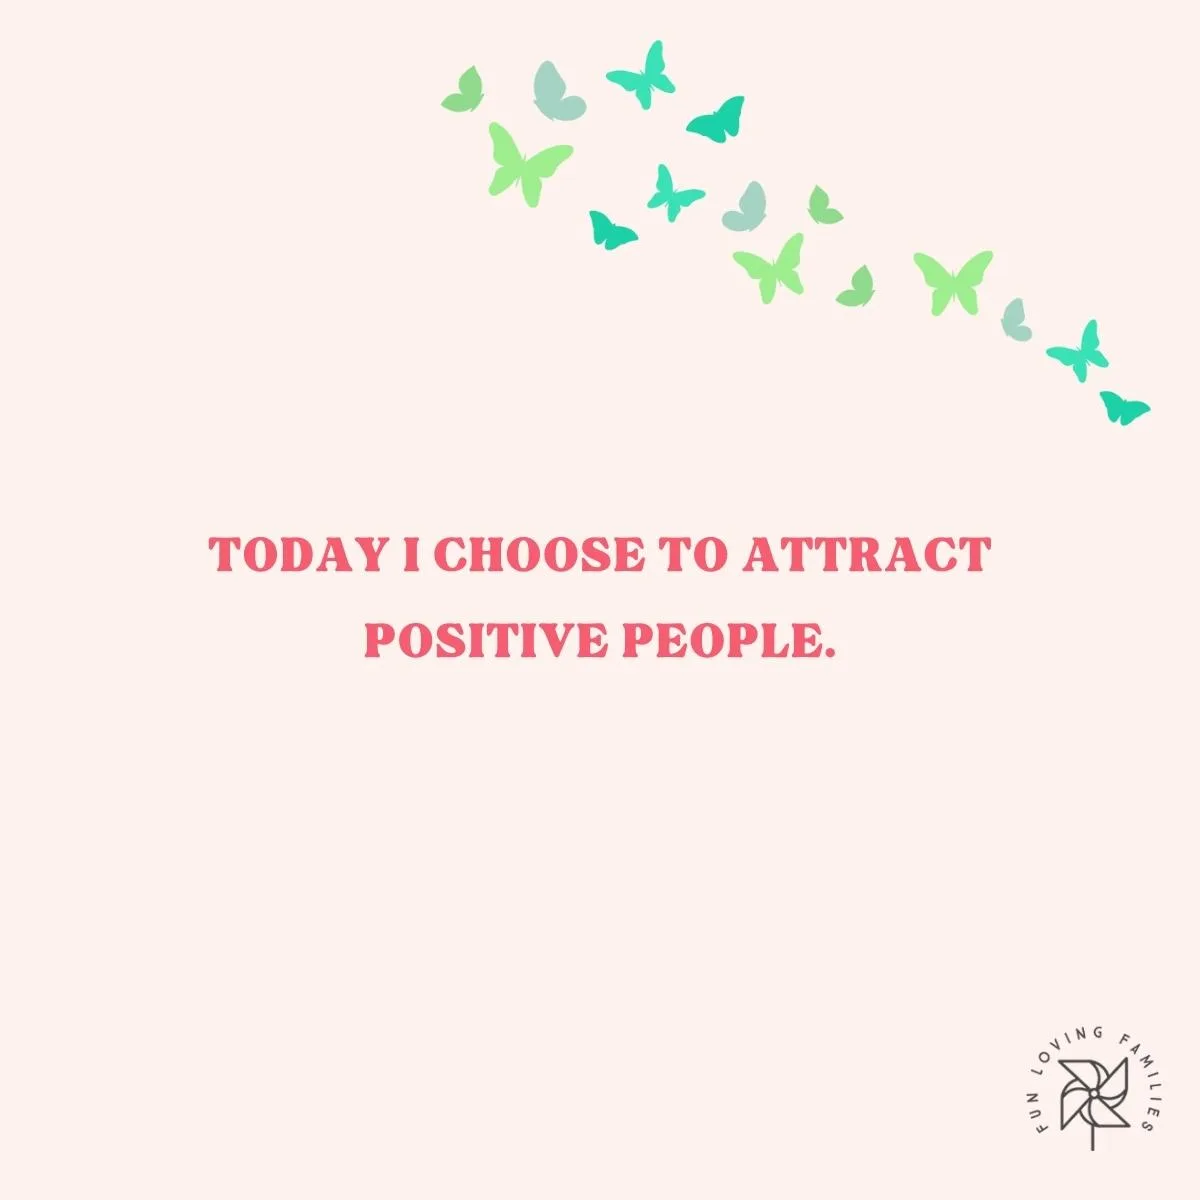 Today I choose to attract positive people affirmation